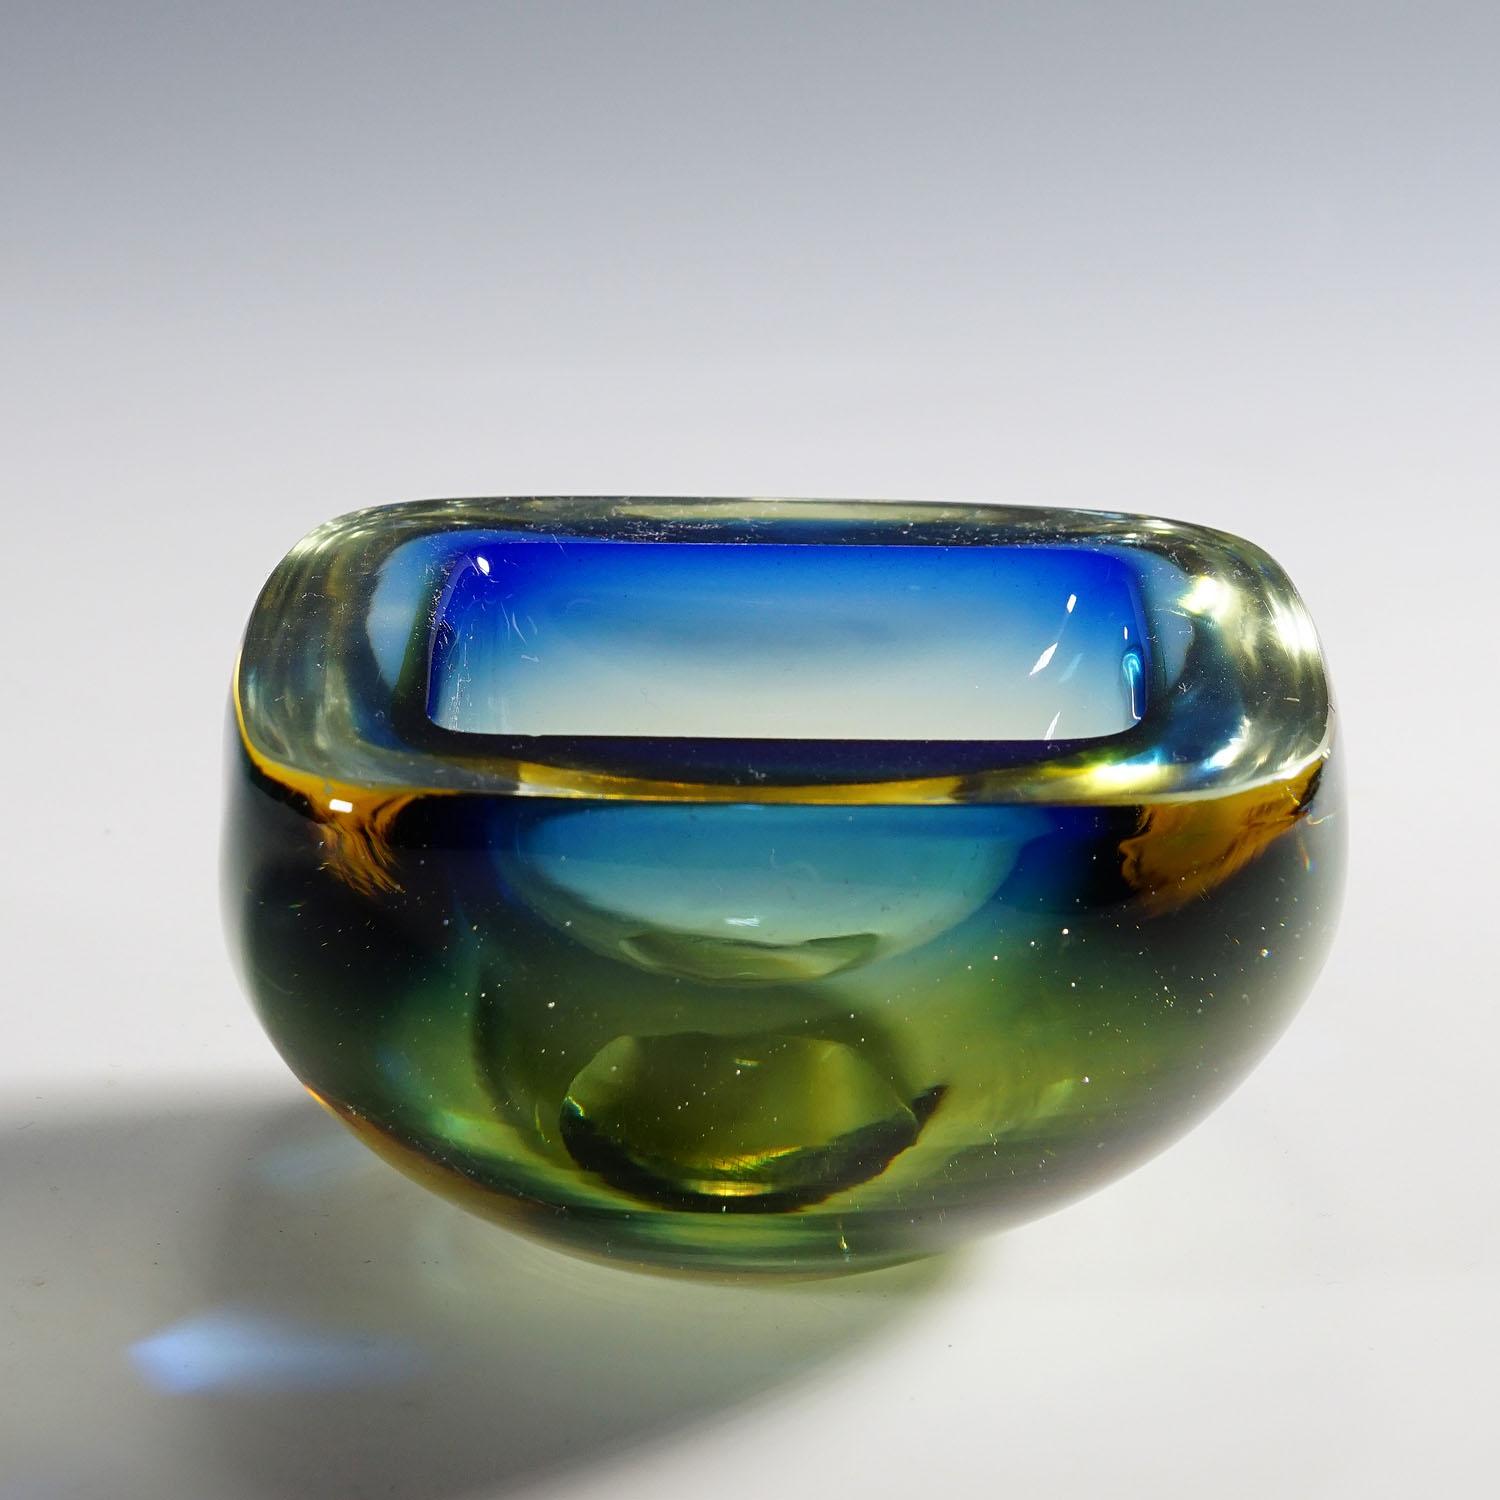 20th Century Midcentury Modern Murano Blue and Yellow Sommerso Art Glass Bowl 1960s For Sale